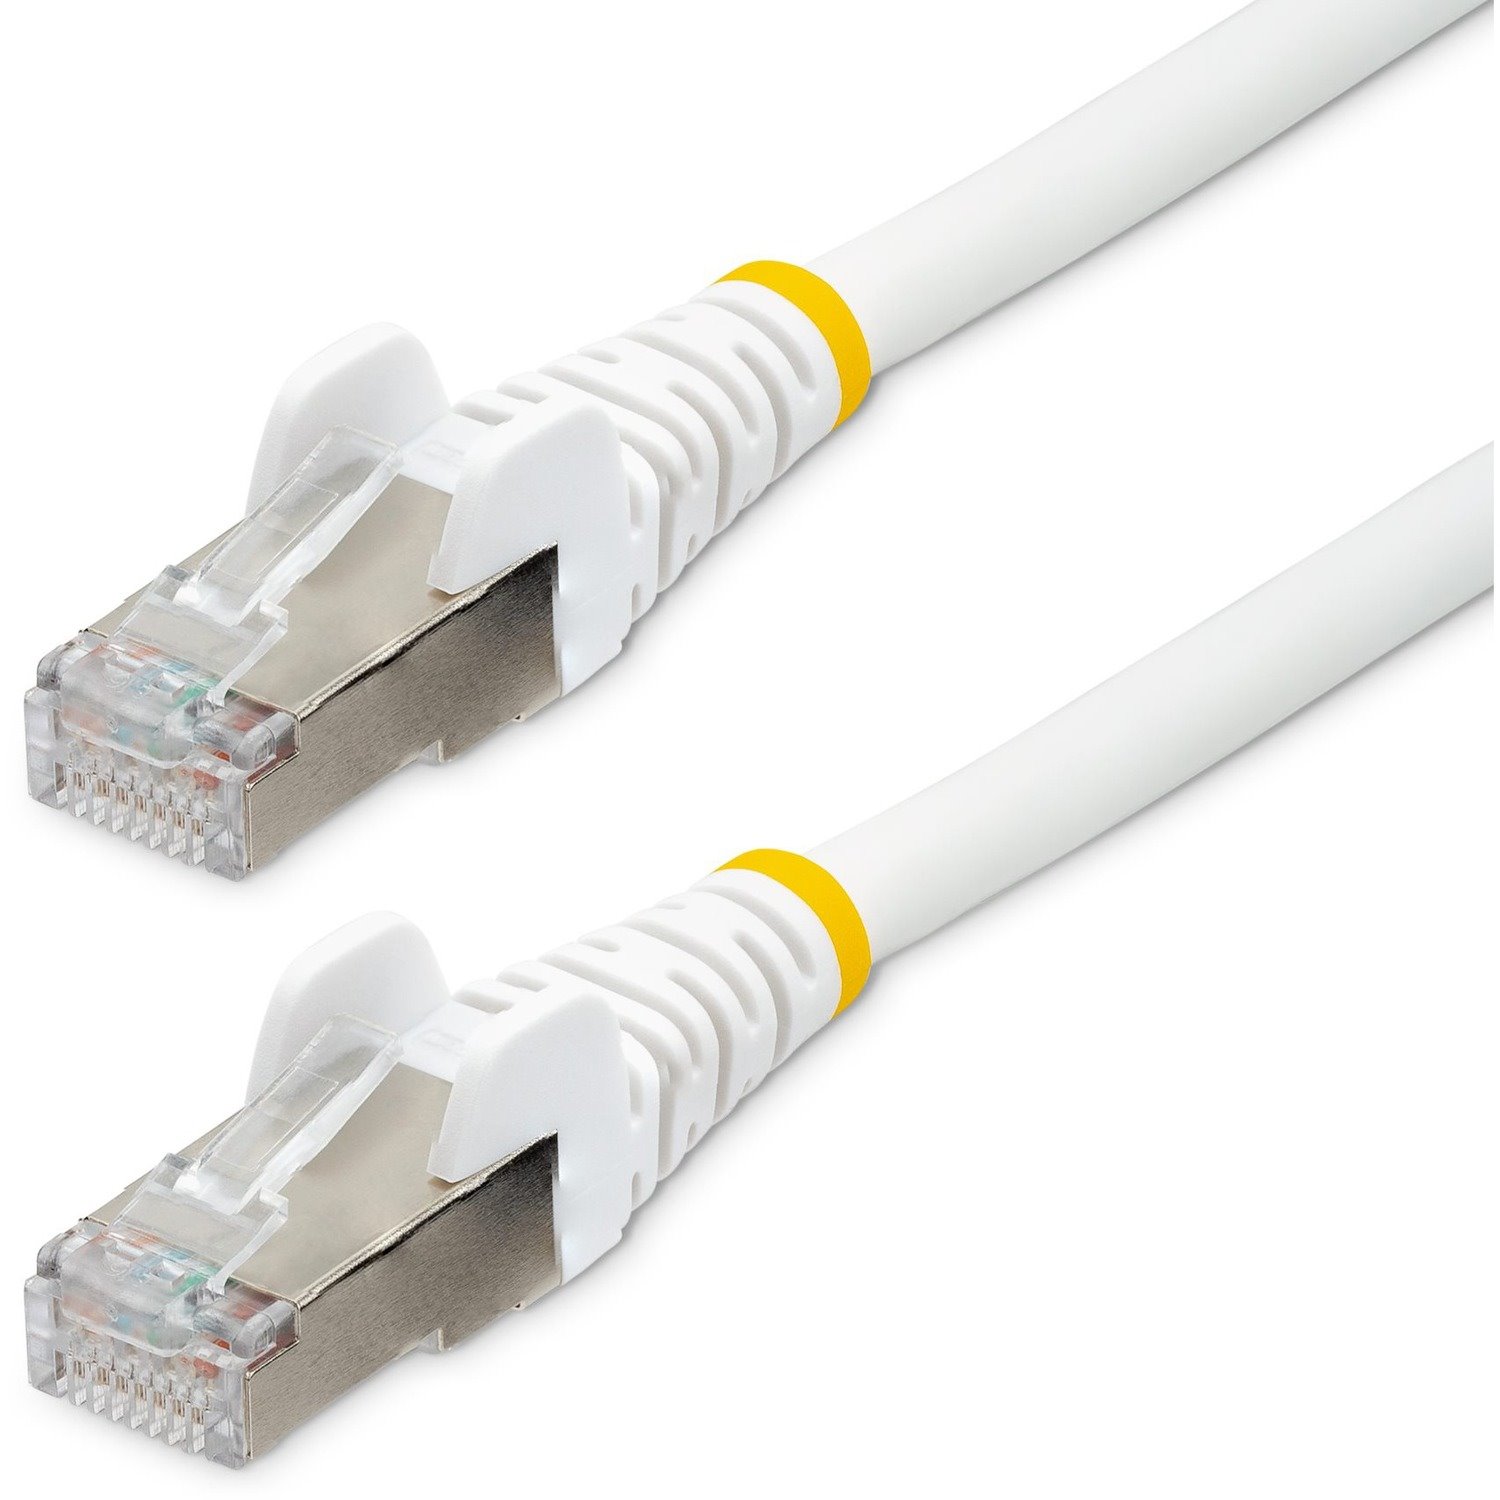 StarTech.com 50 cm Category 6a Network Cable for Network Device - 1 Pack